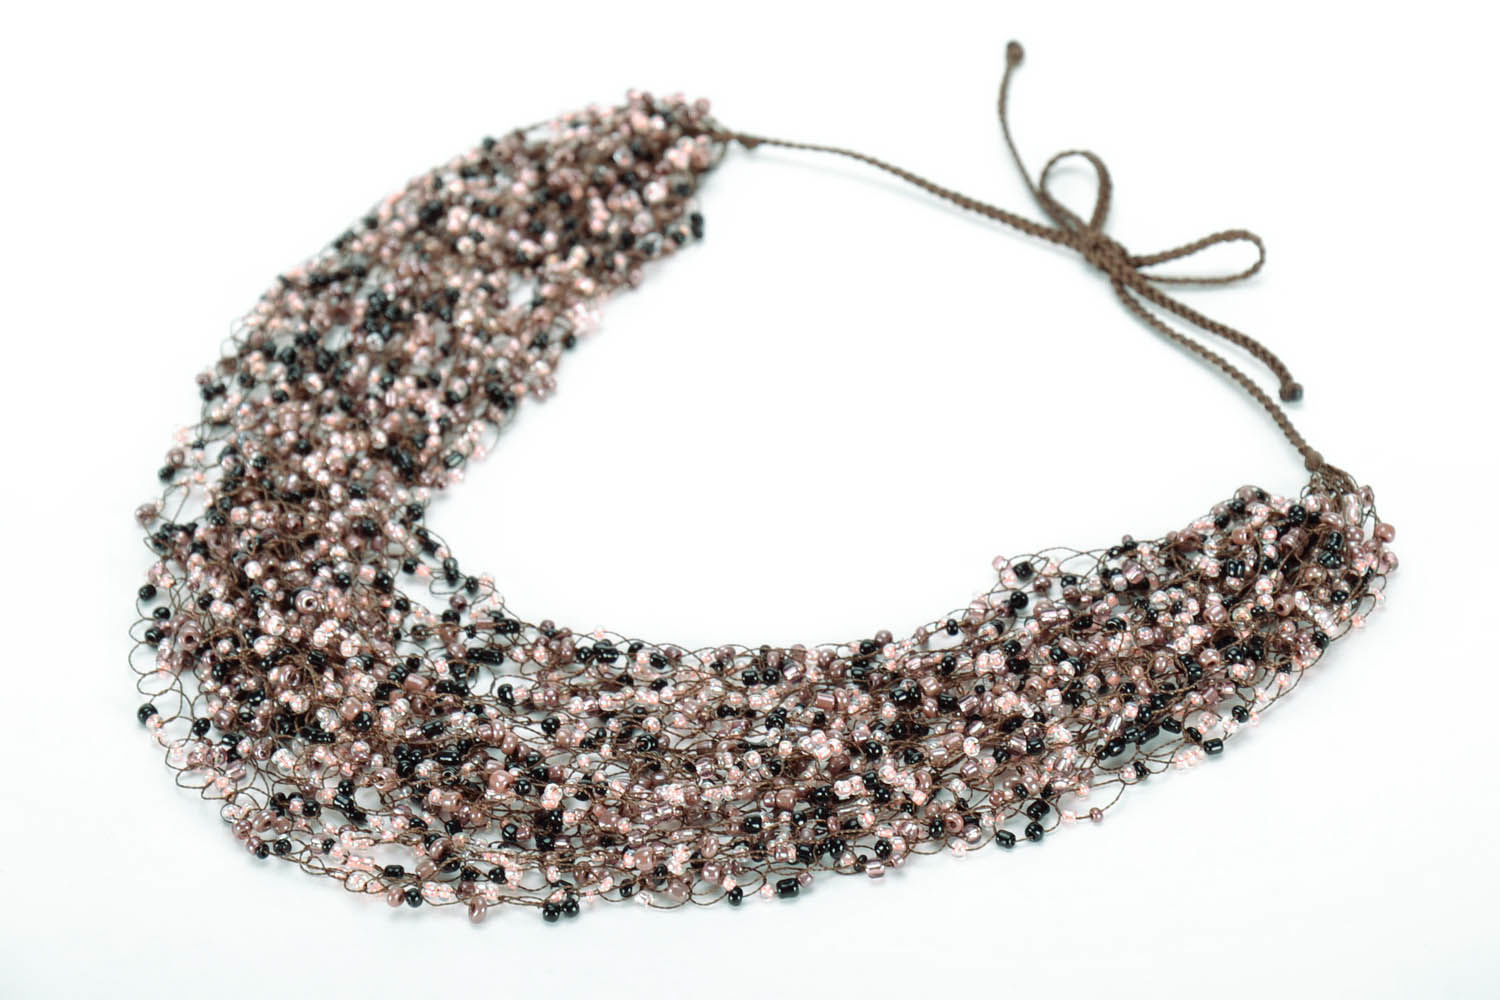 Necklace made of beads photo 1